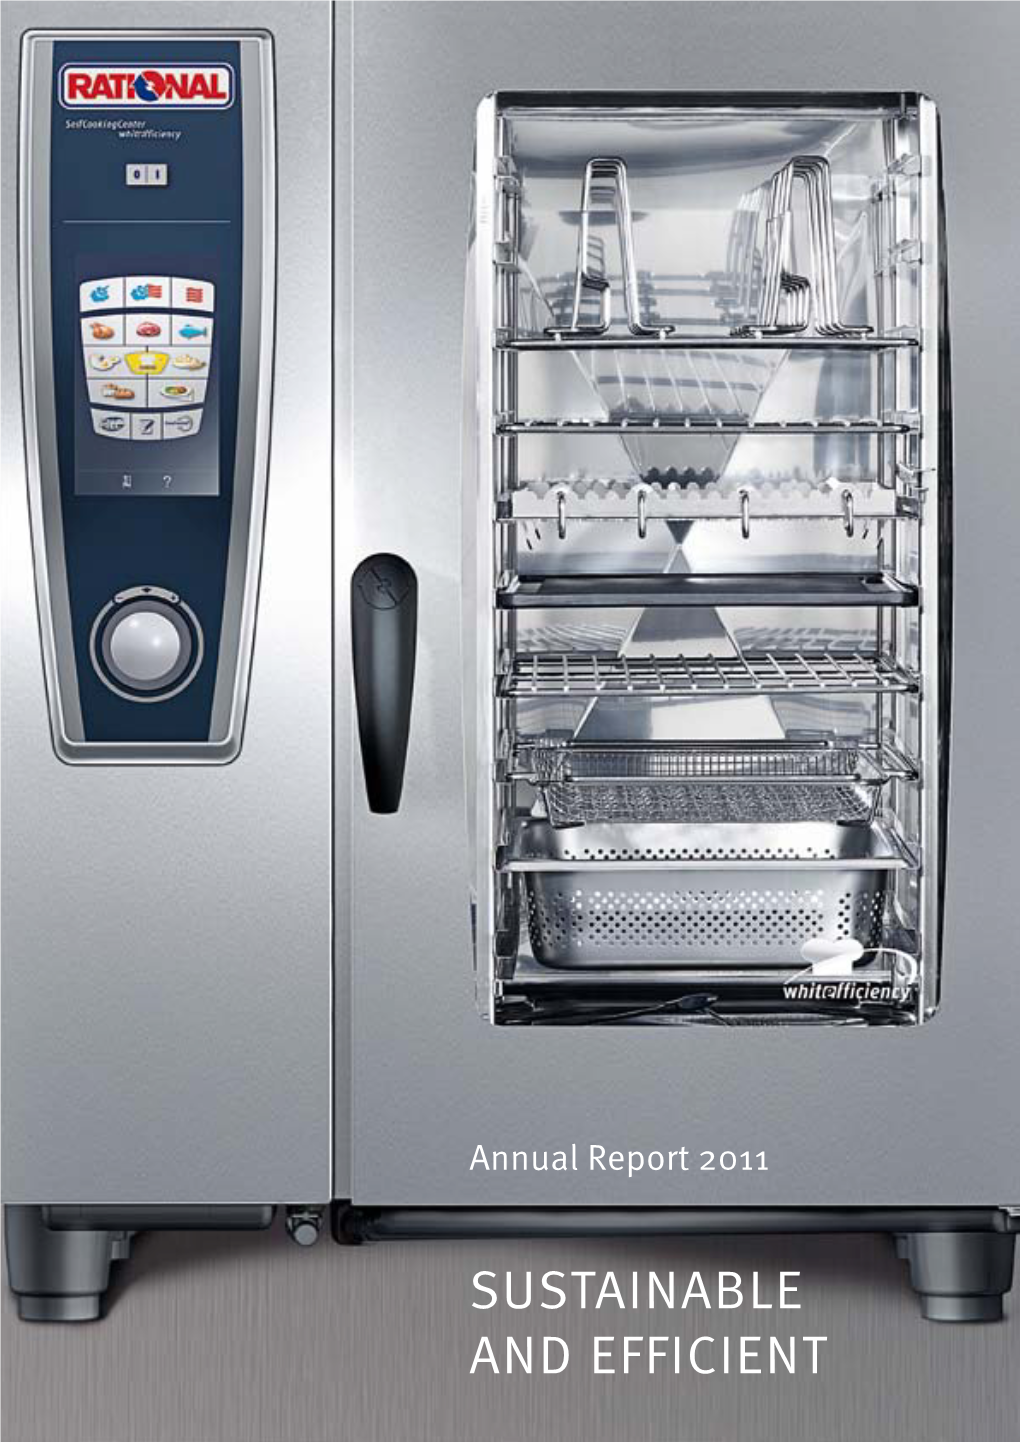 Annual Report 2011 of RATIONAL AG